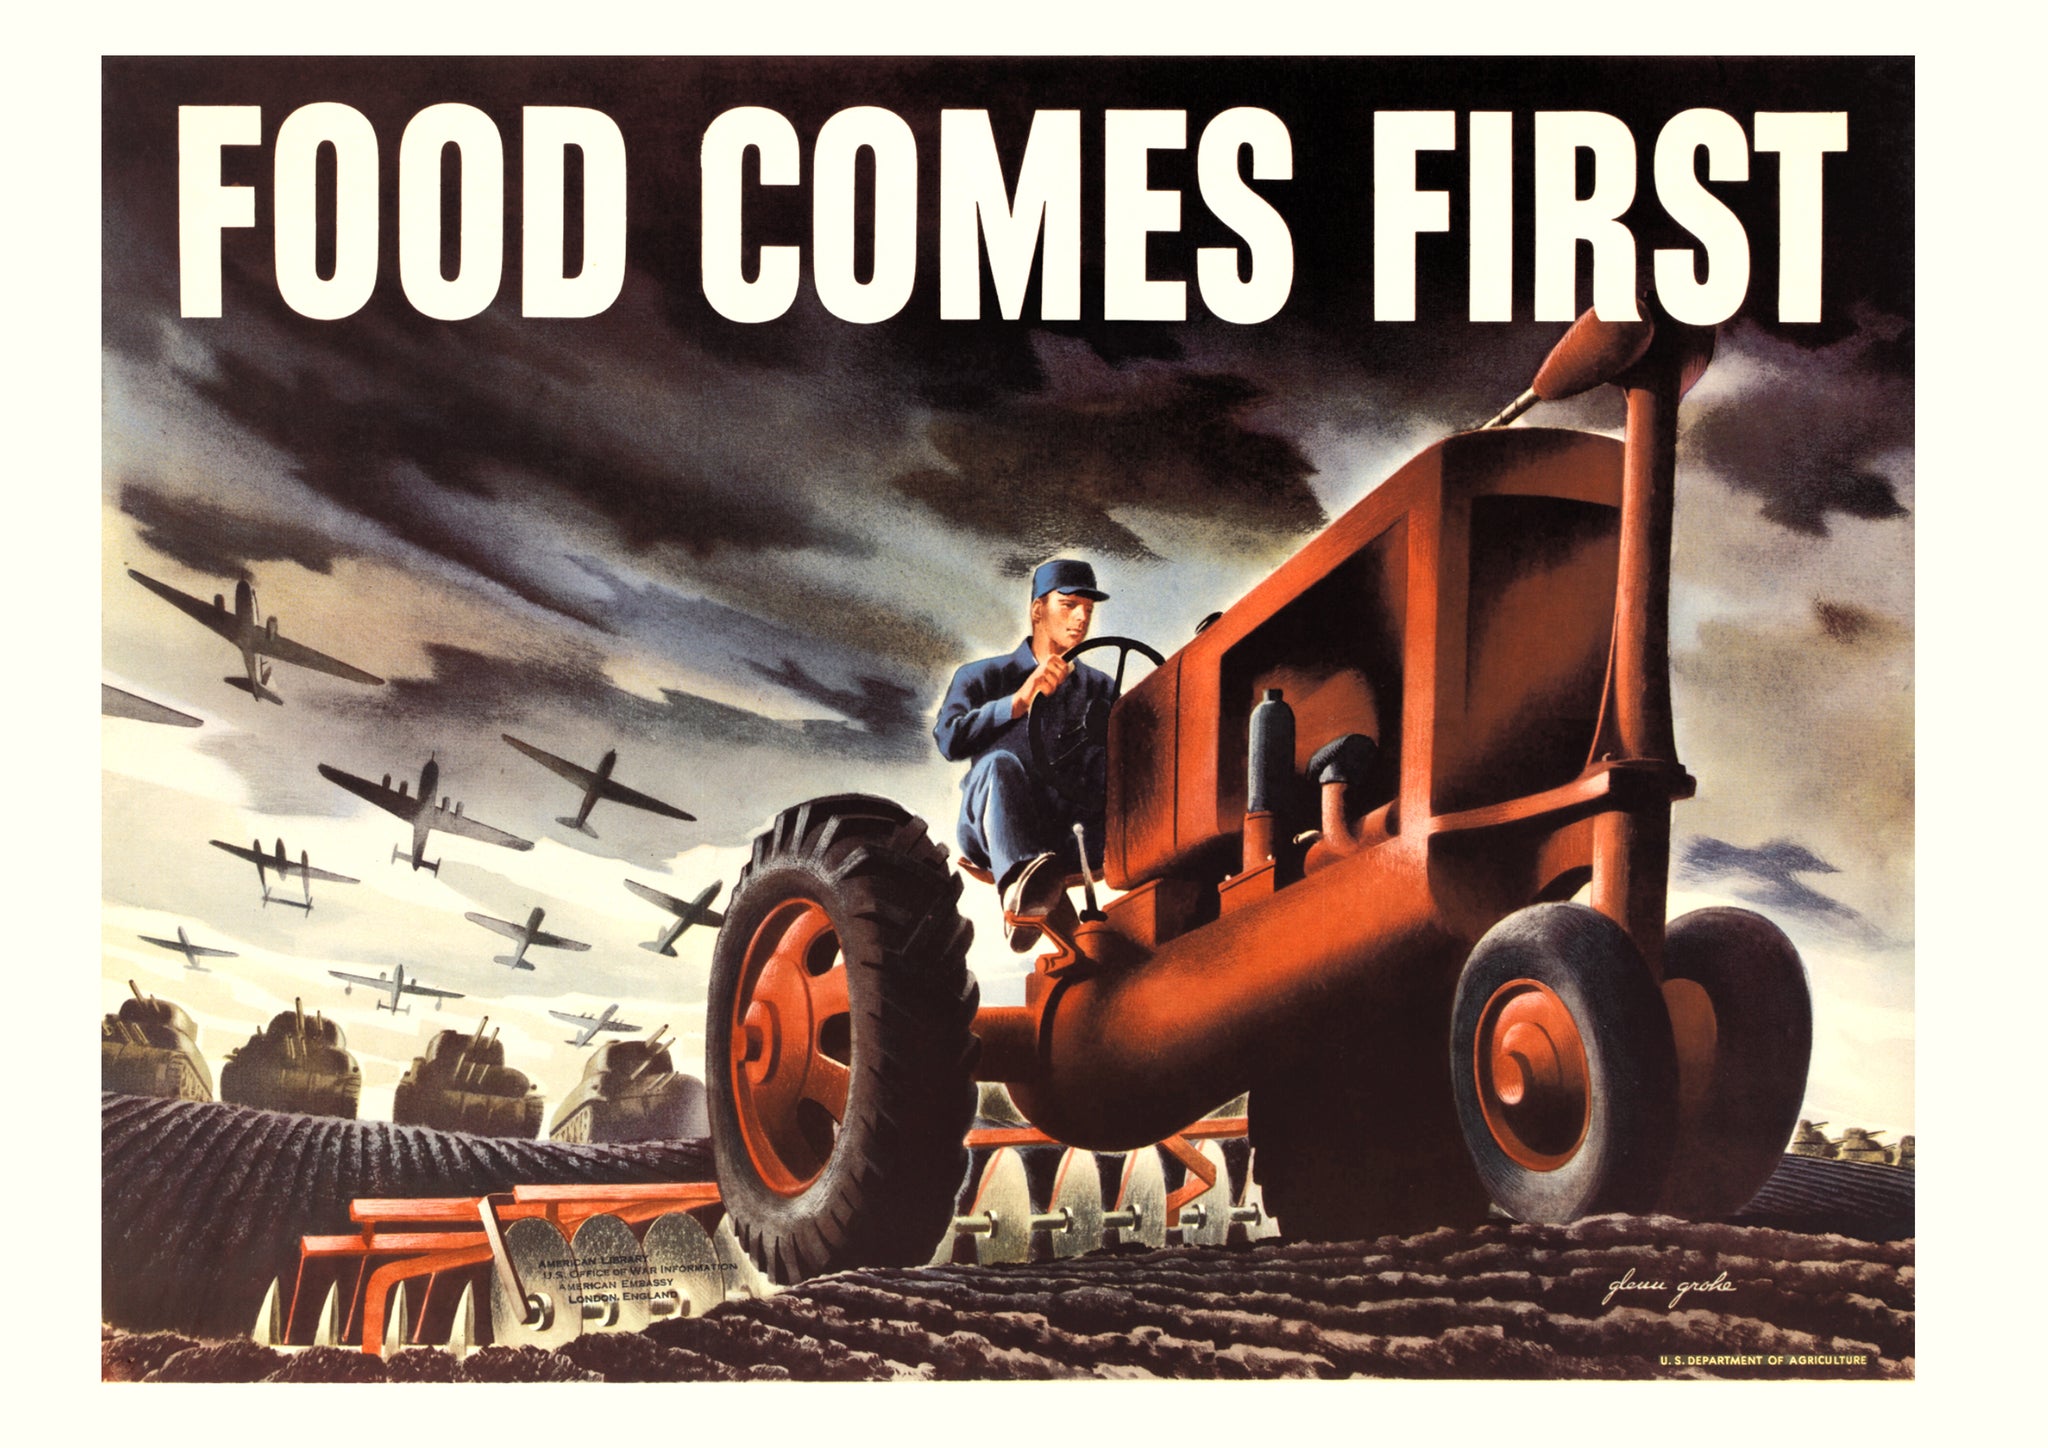 Food comes first — American World War Two poster